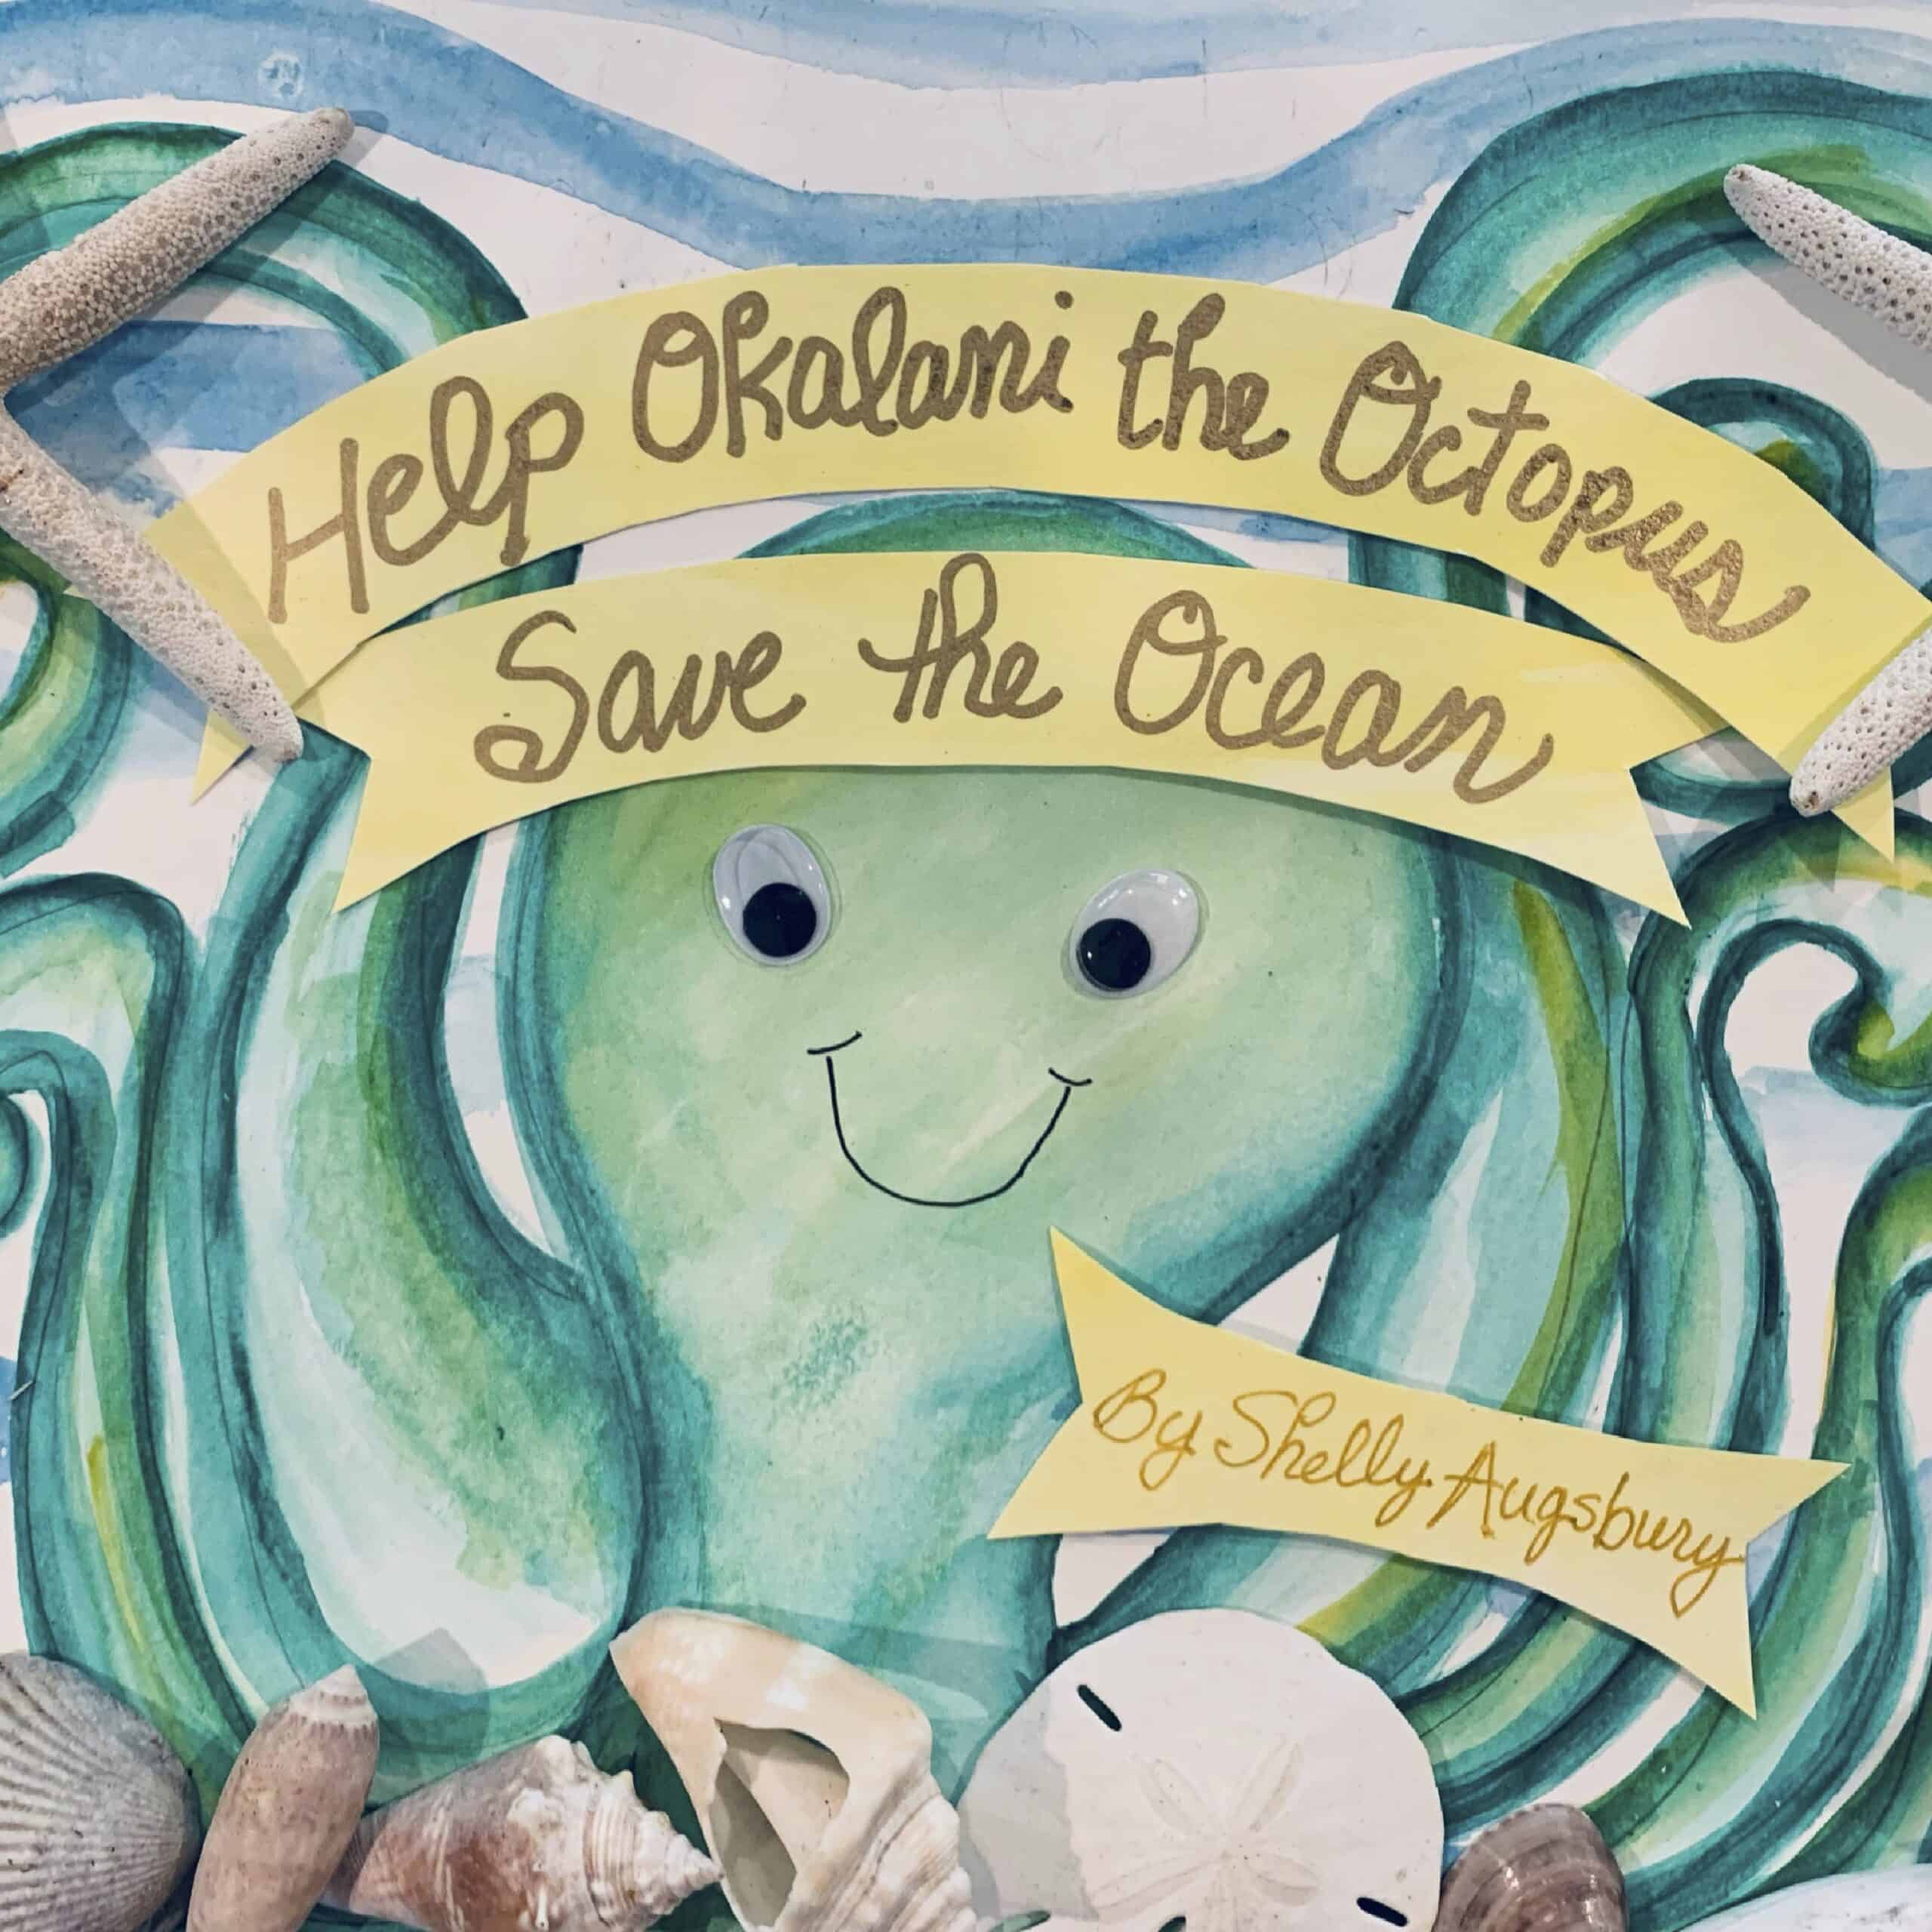 Okalani Octopus Helps Teach Children Life Lessons in A Colorful Way